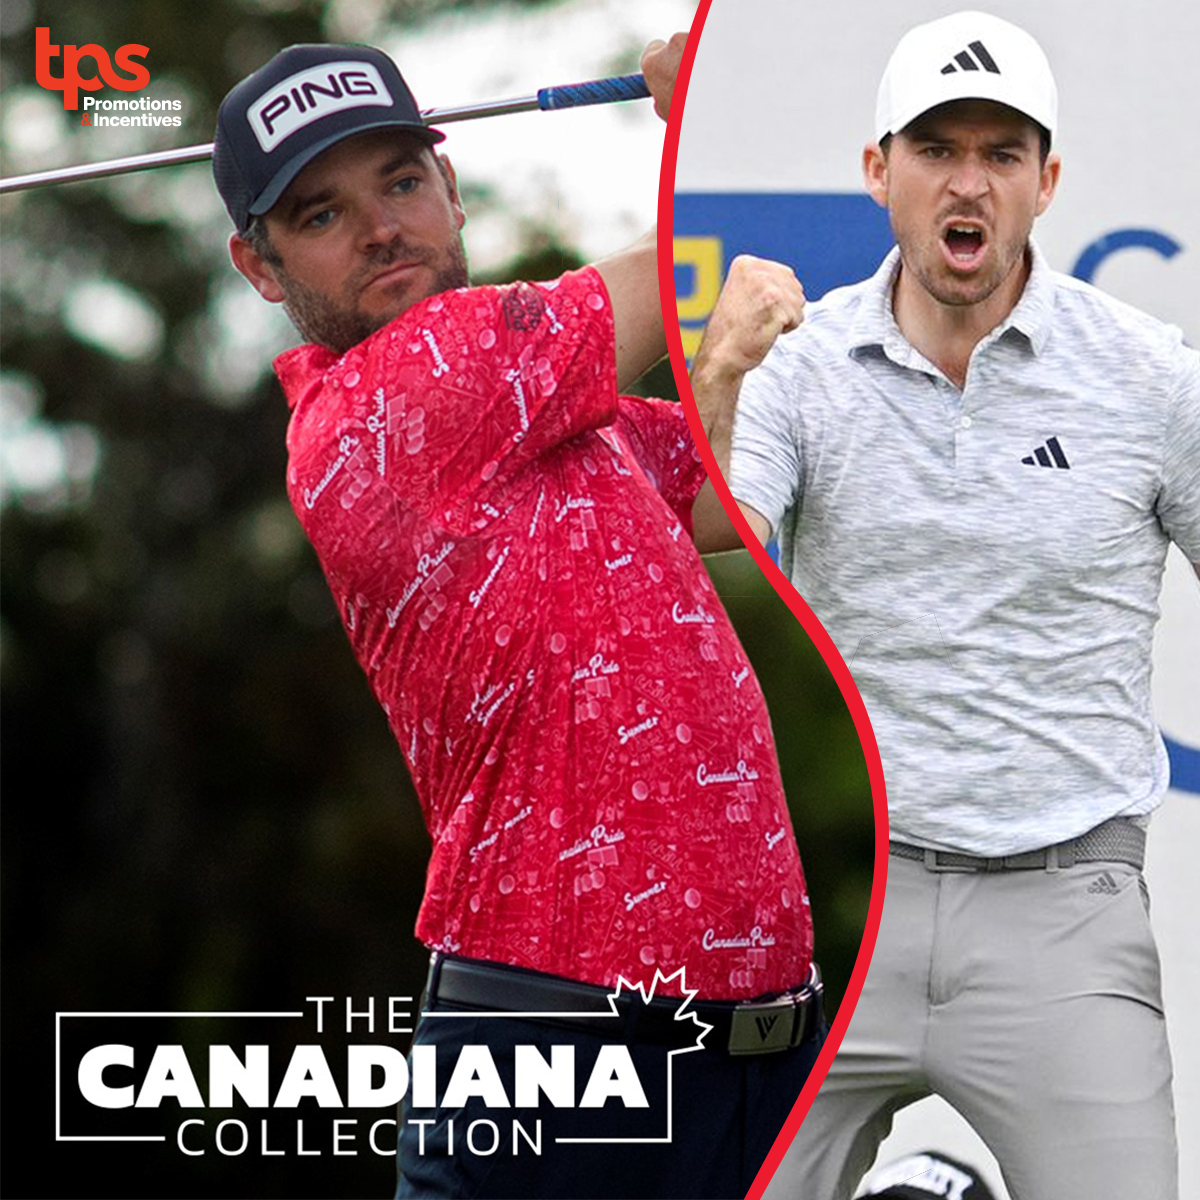 Congratulations to Nick Taylor on his RBC Canadian Open victory! Kudos also to Corey Conners on his top-20 finish. TPS is proud to offer The Canadiana Collection from our long-time supplier-partner Levelwear. We’re happy to add your brand too! #nicktaylor #coreyconners #CanadaDay